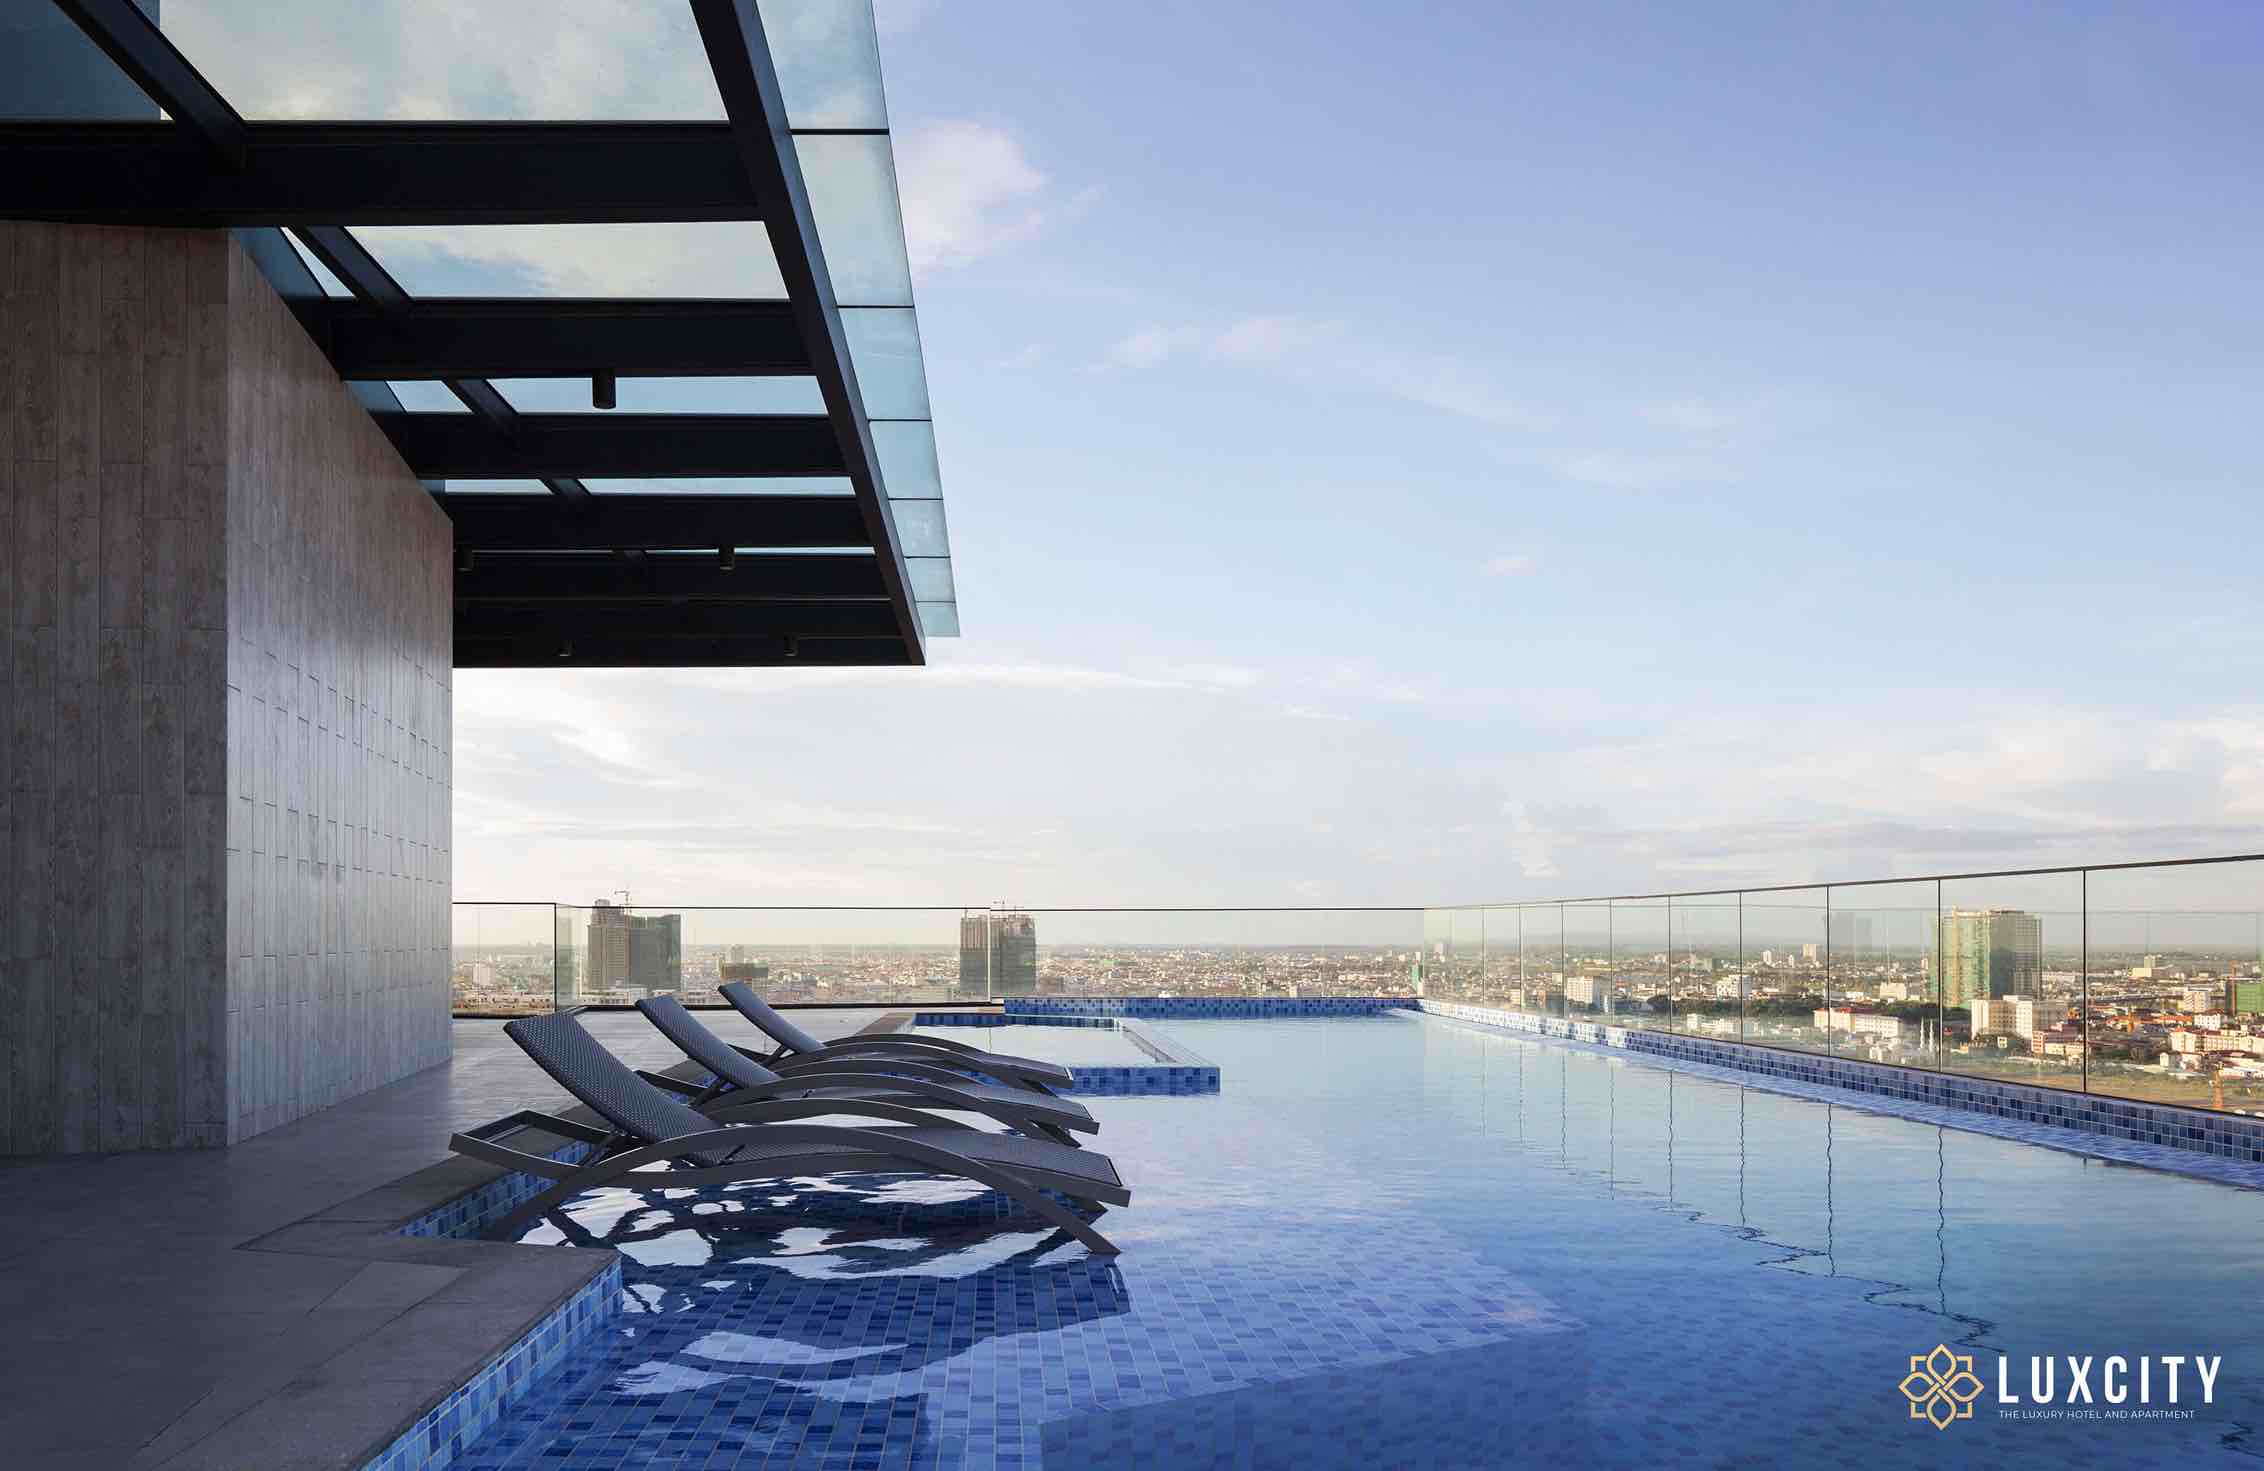 The impeccable rooftop swimming pool with a view